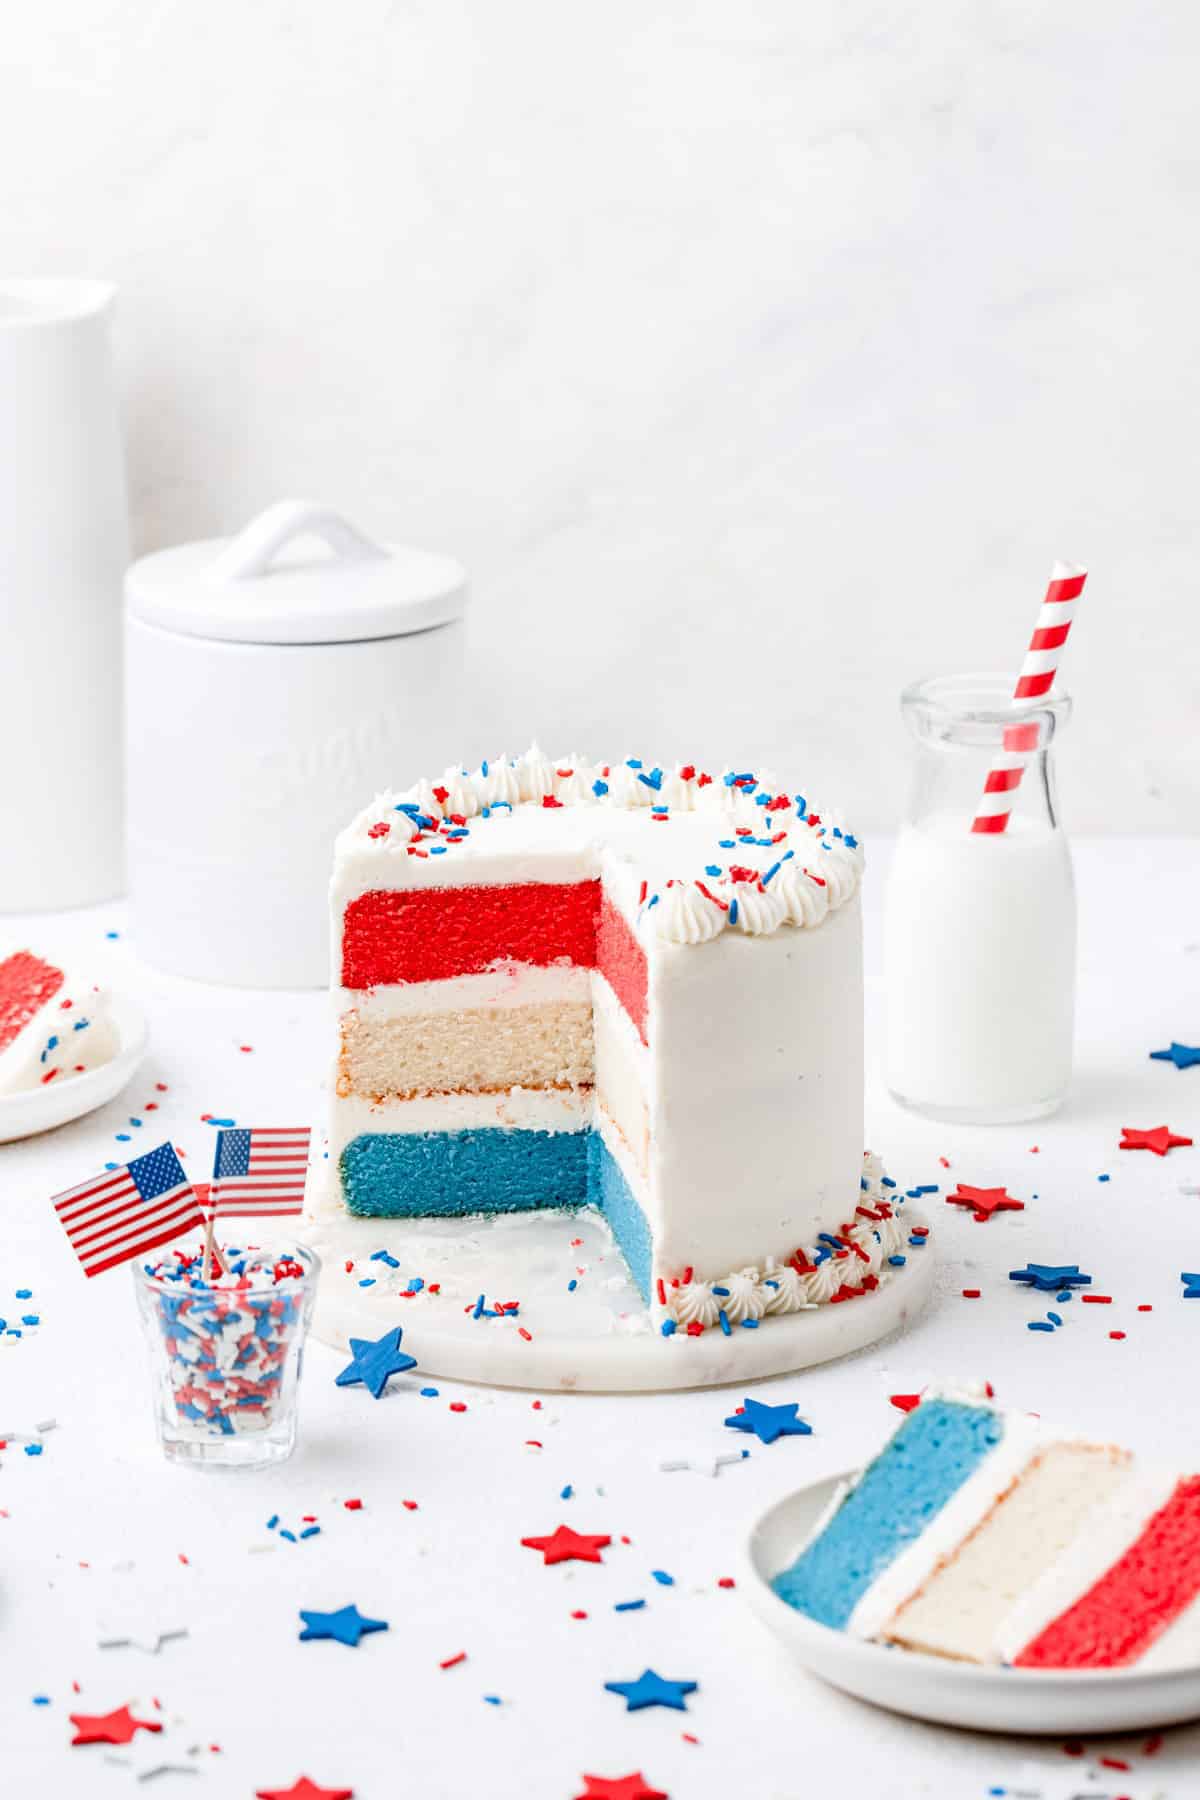 red, white and blue layer cake with a slice cut out.